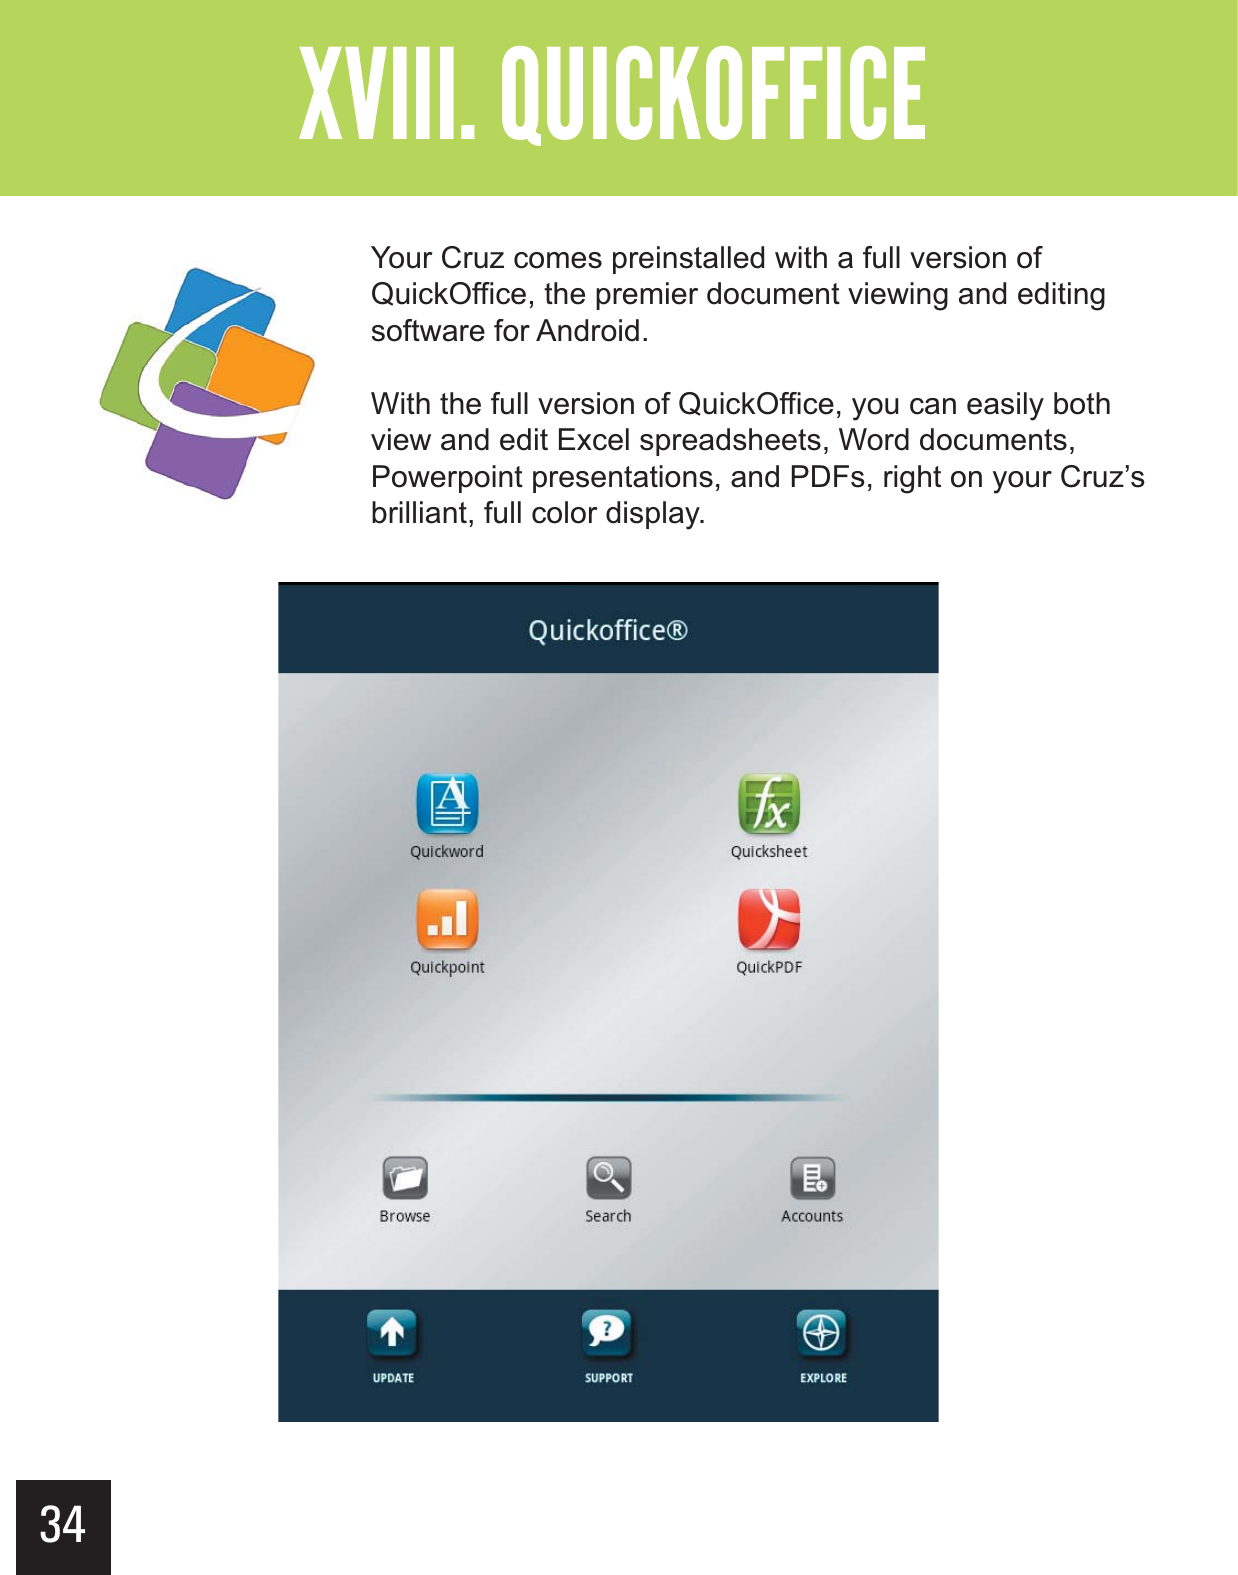 34&quot;--$#&gt;-(+-&quot;?&gt;Your Cruz comes preinstalled with a full version of QuickOffice, the premier document viewing and editing software for Android. With the full version of QuickOffice, you can easily both view and edit Excel spreadsheets, Word documents, Powerpoint presentations, and PDFs, right on your Cruz’s brilliant, full color display.